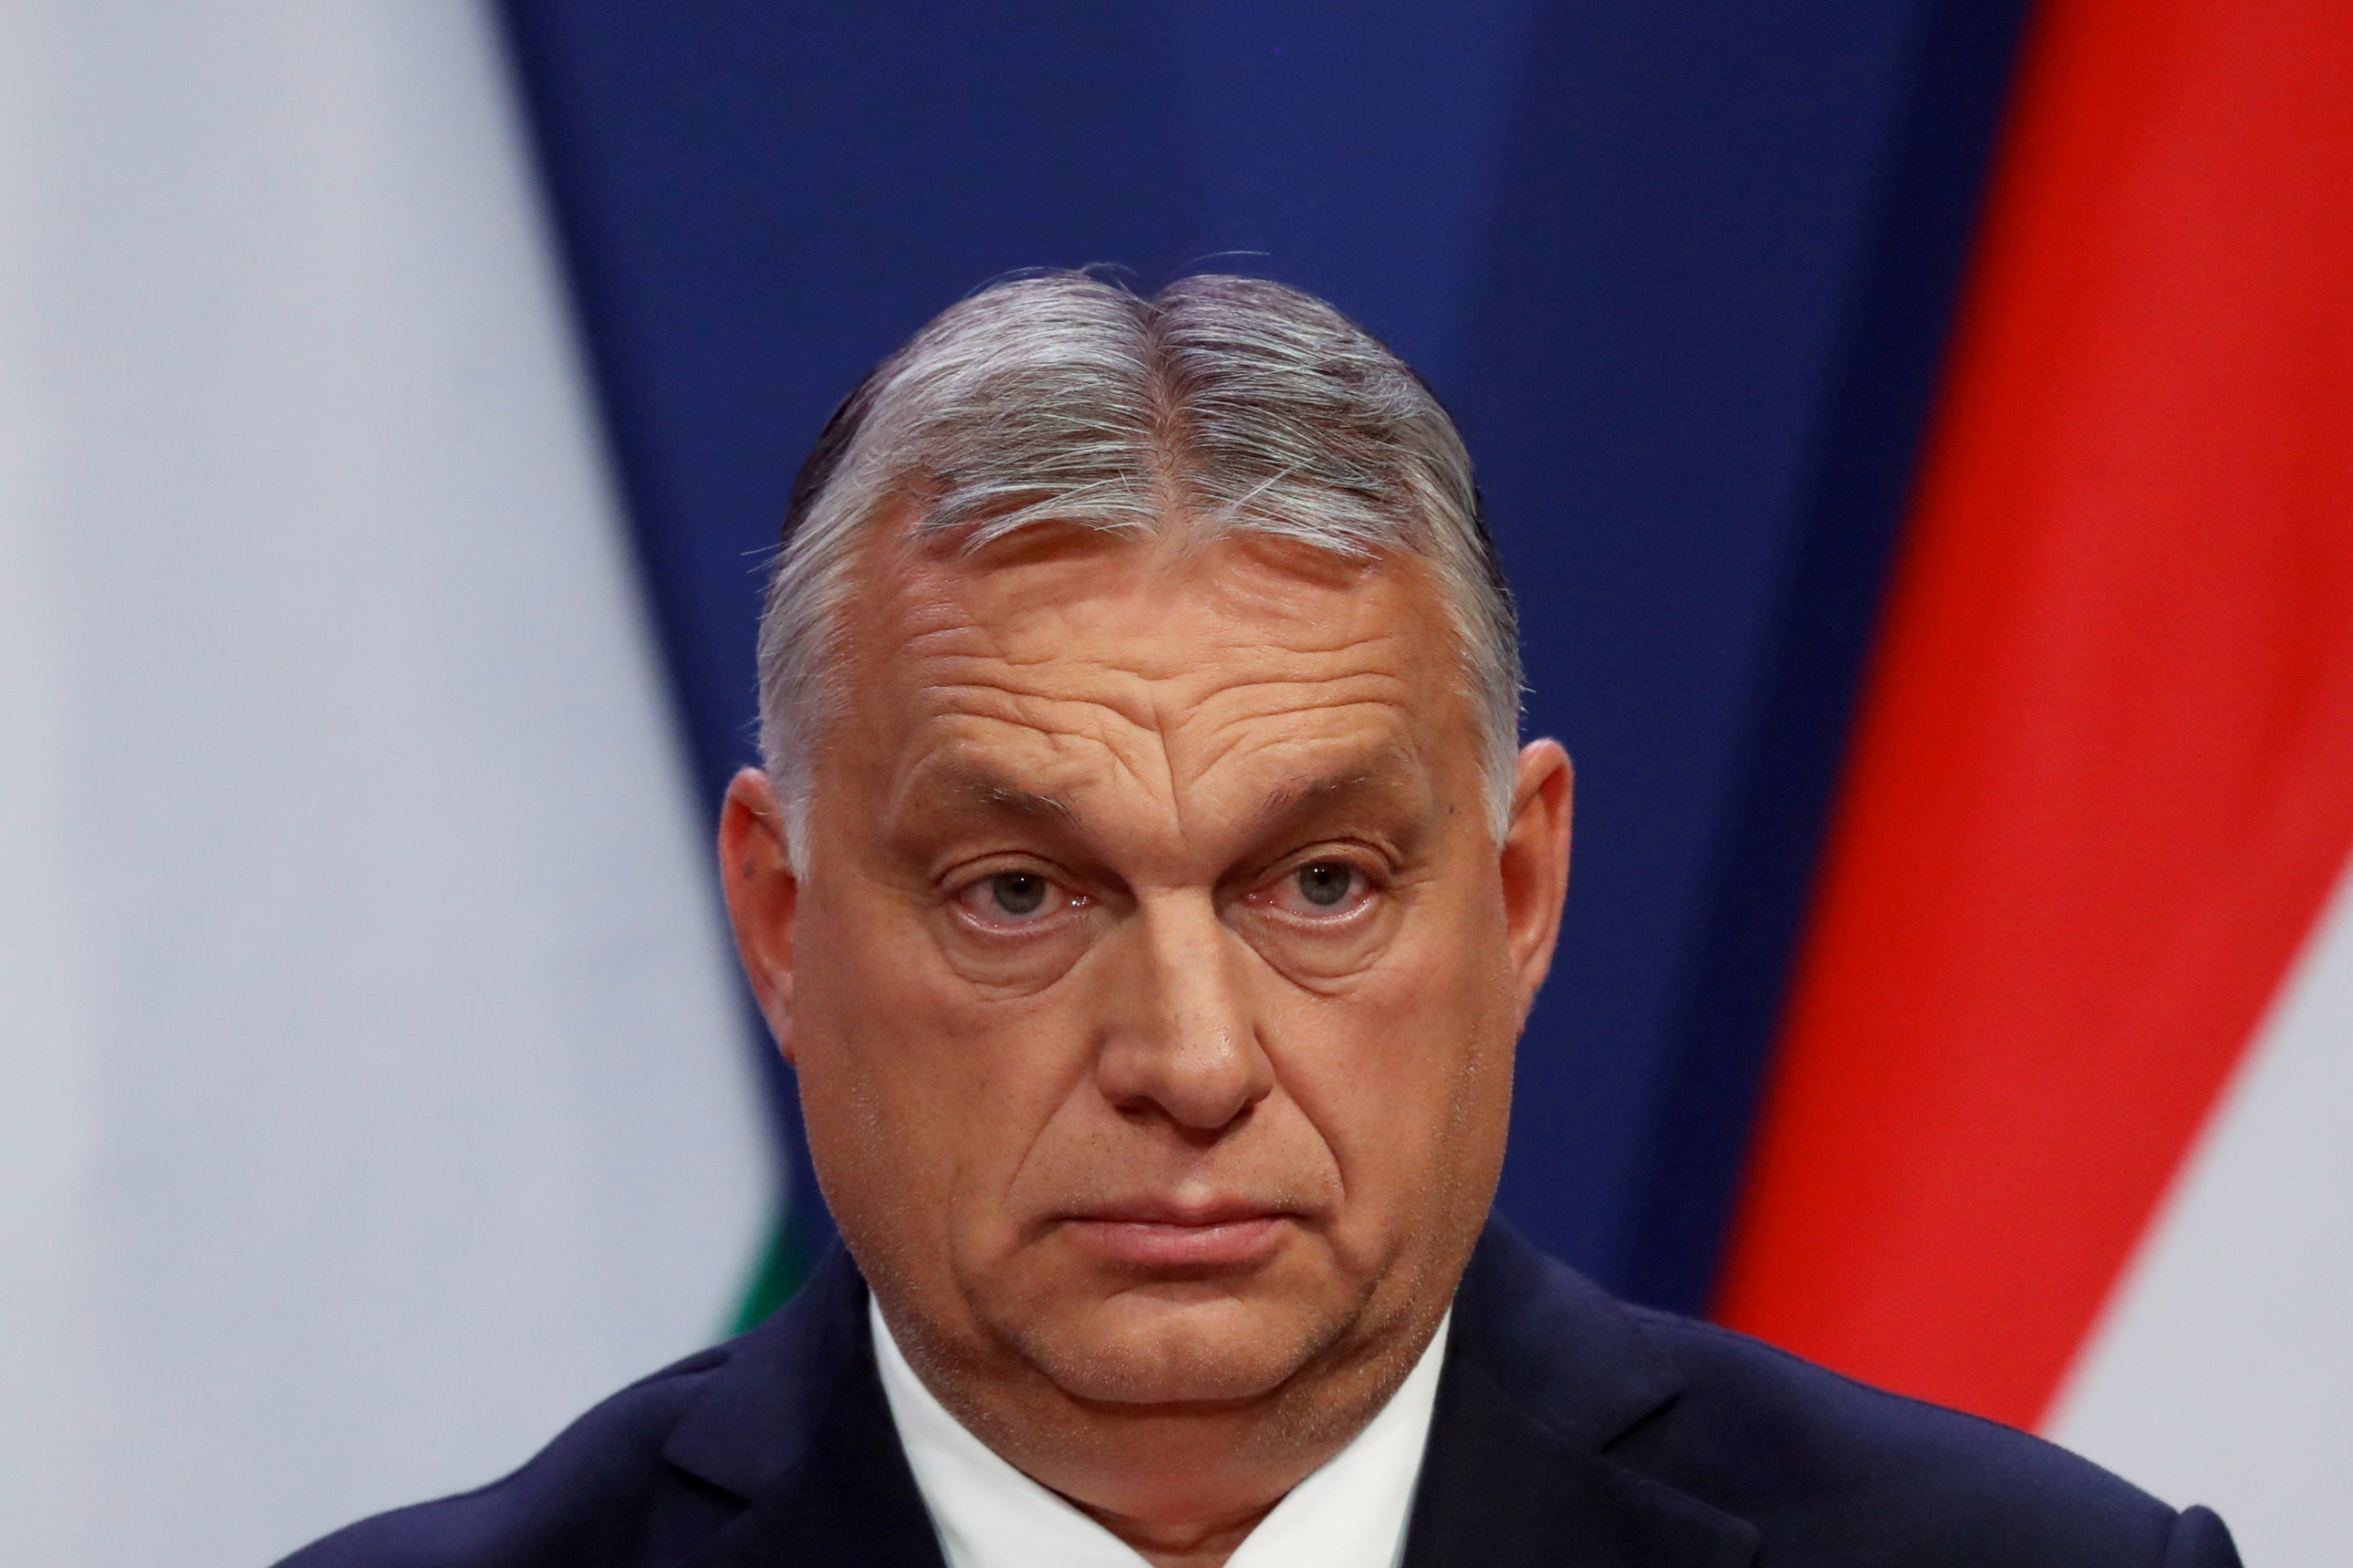 Viktor Orban is set to face his toughest challenge to date in next year’s elections